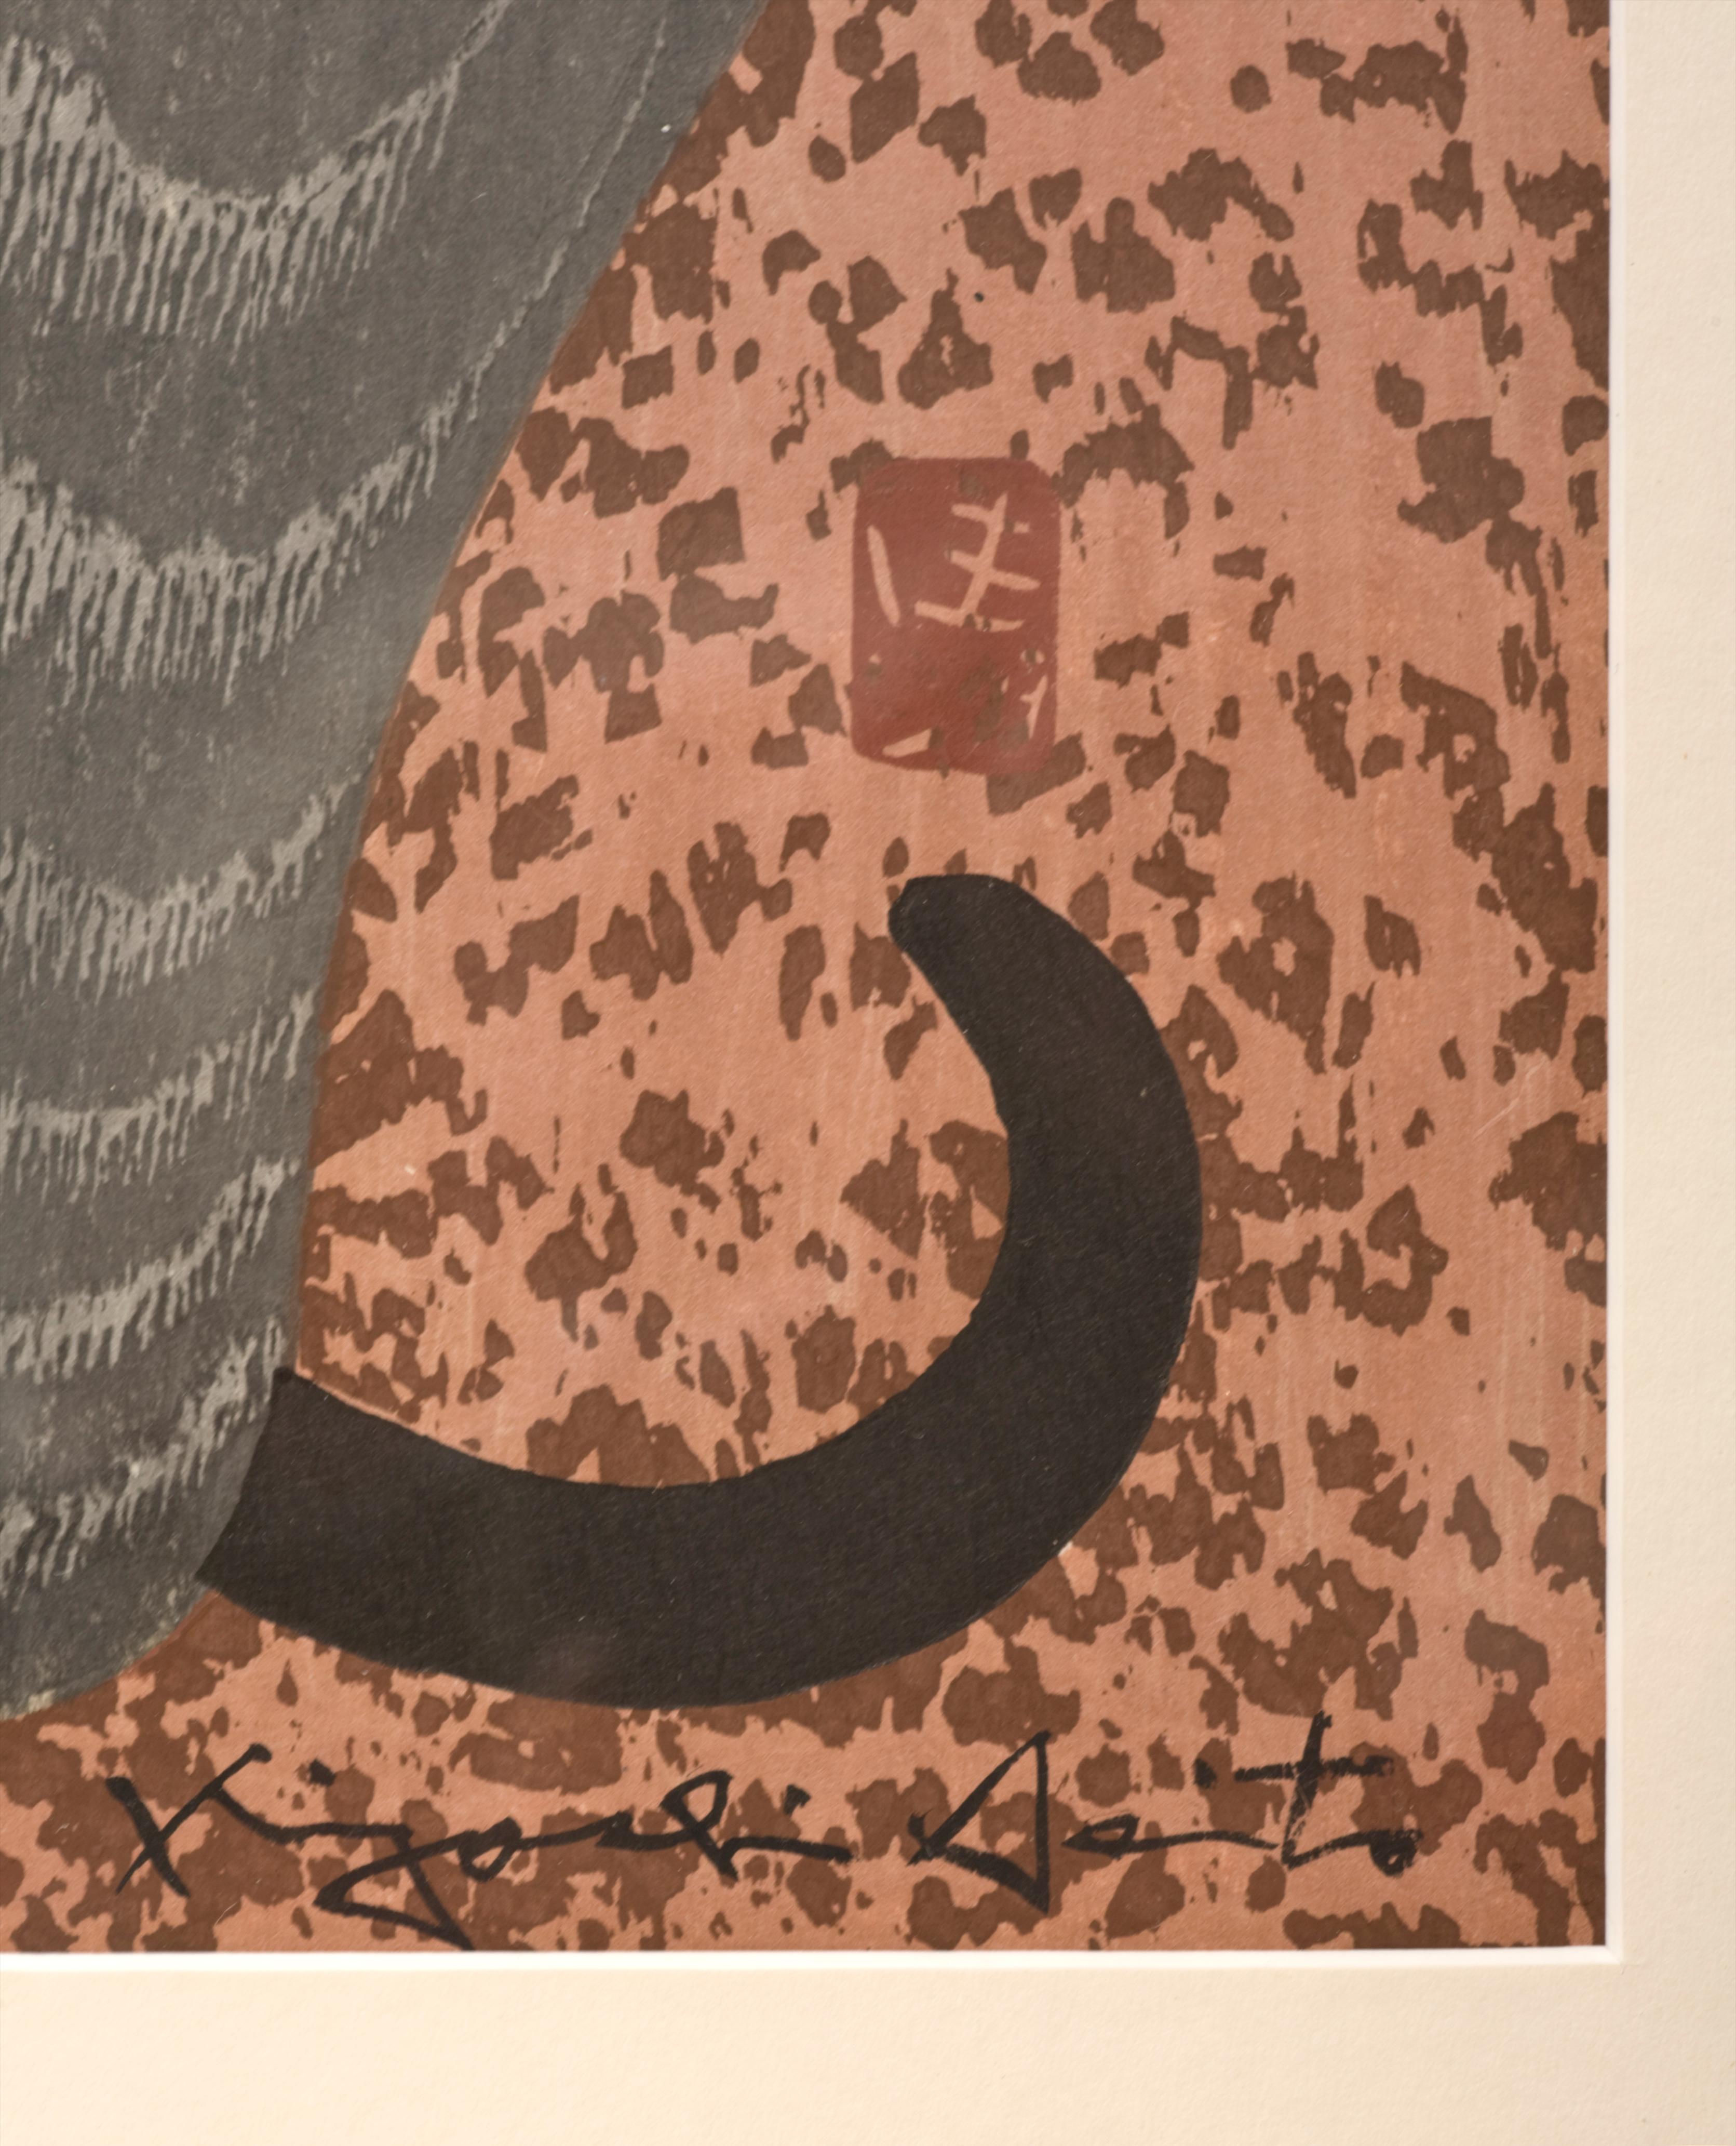 Japanese Woodblock Kiyoshi Saito
Kiyoshi Saito (1907-1997)
Woodblock “Steady Gaze” of Cat Series
Red Seal/Signed in Black Ink within image
Stamped
Very good color
1960
Condition:  see images unframed (front and back)
